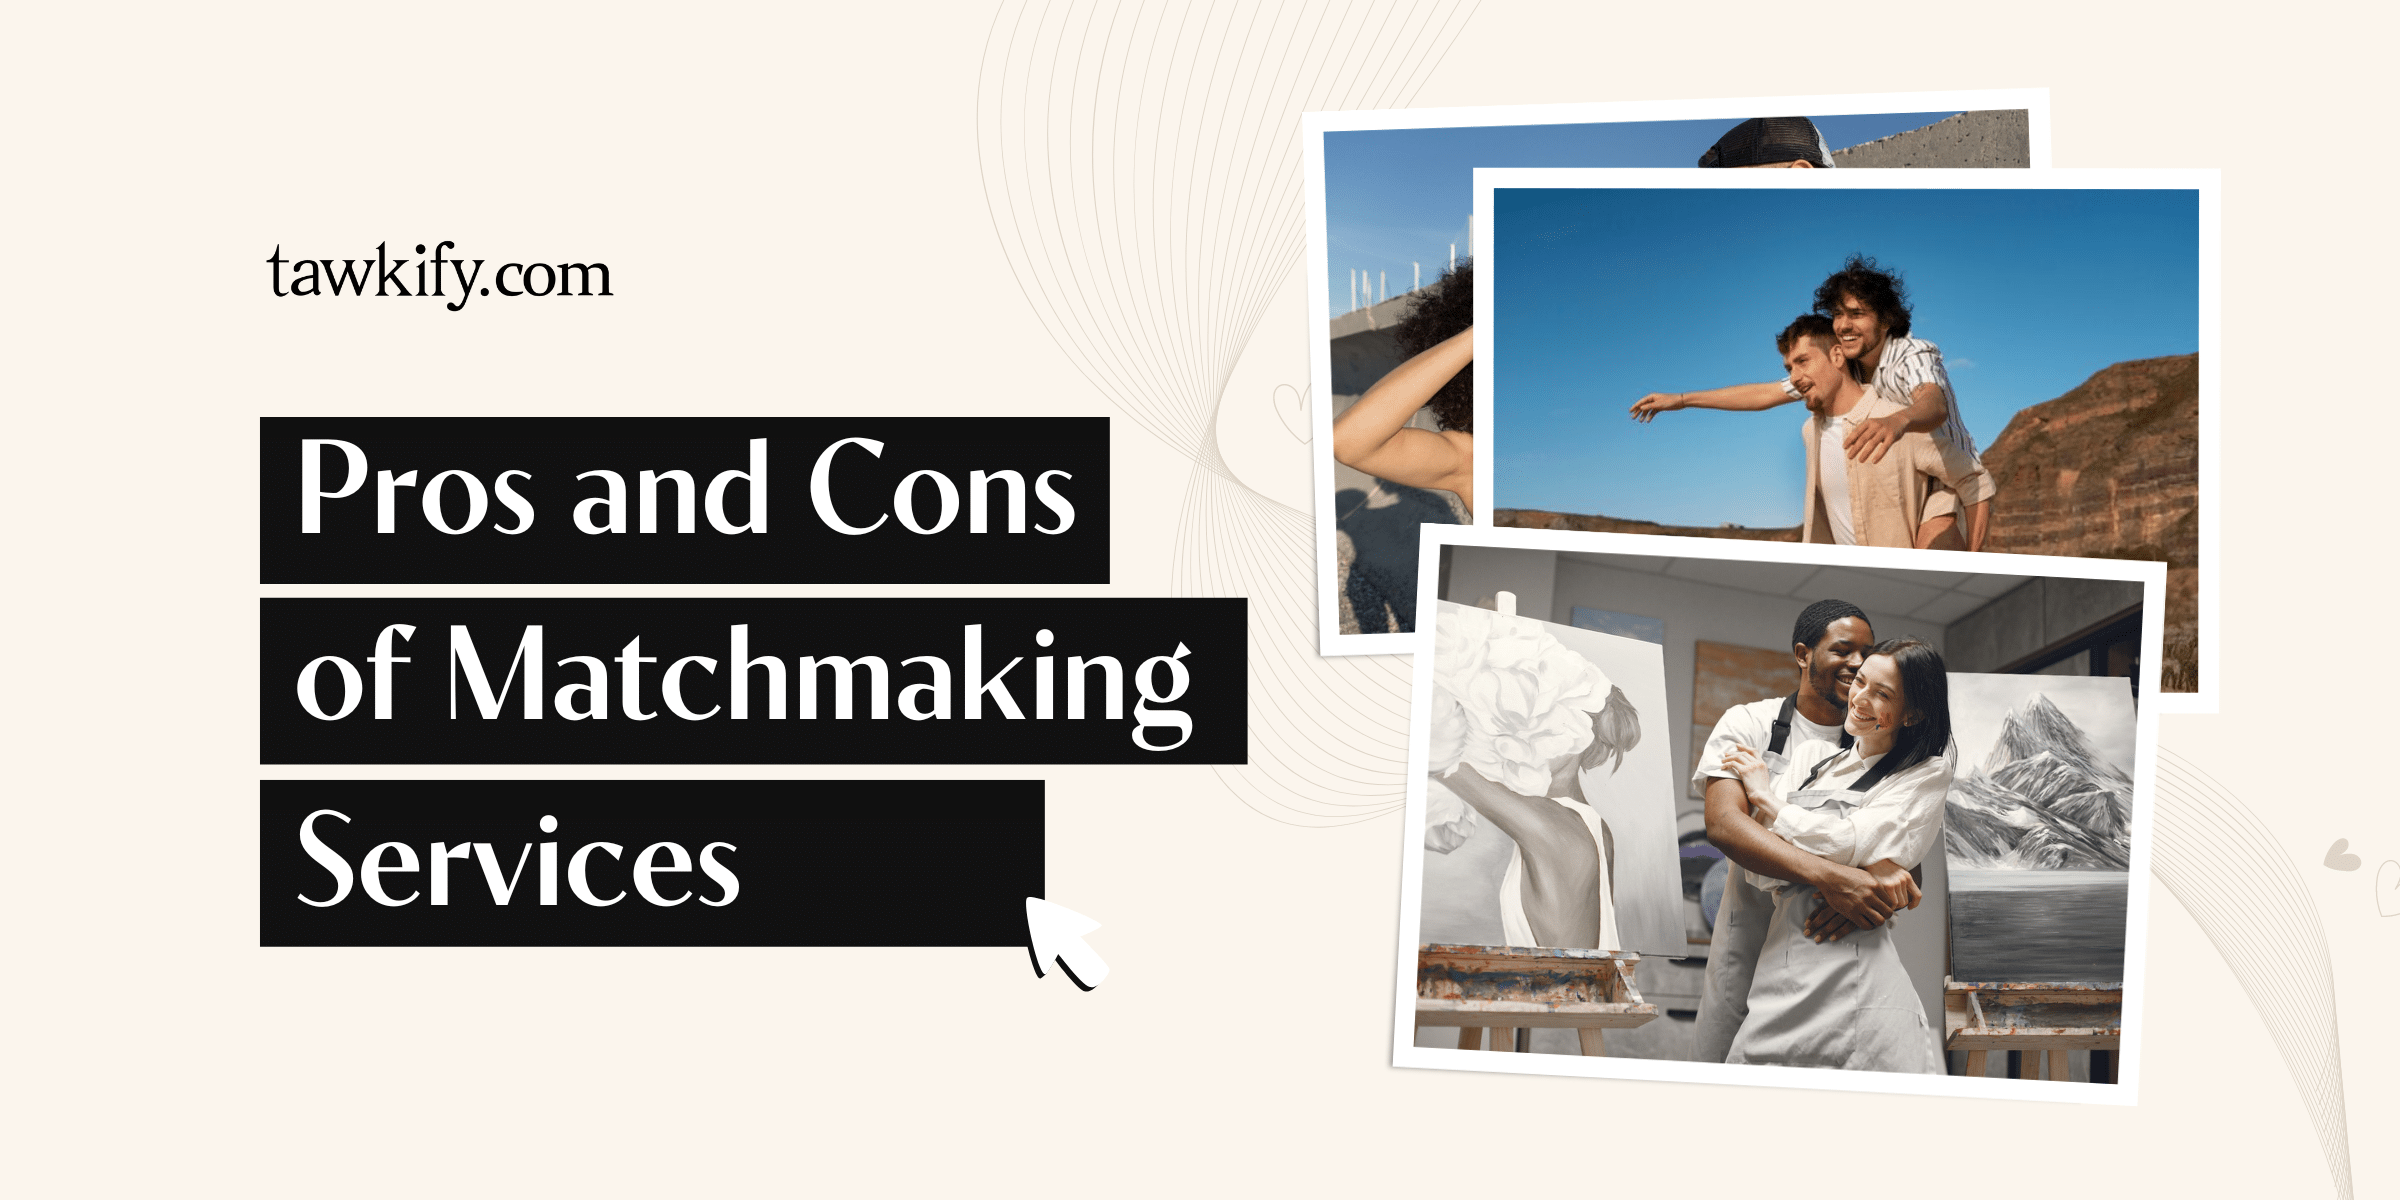 Considering matchmaking? Read our guide on its pros and cons to see if it's the right choice for your dating journey.